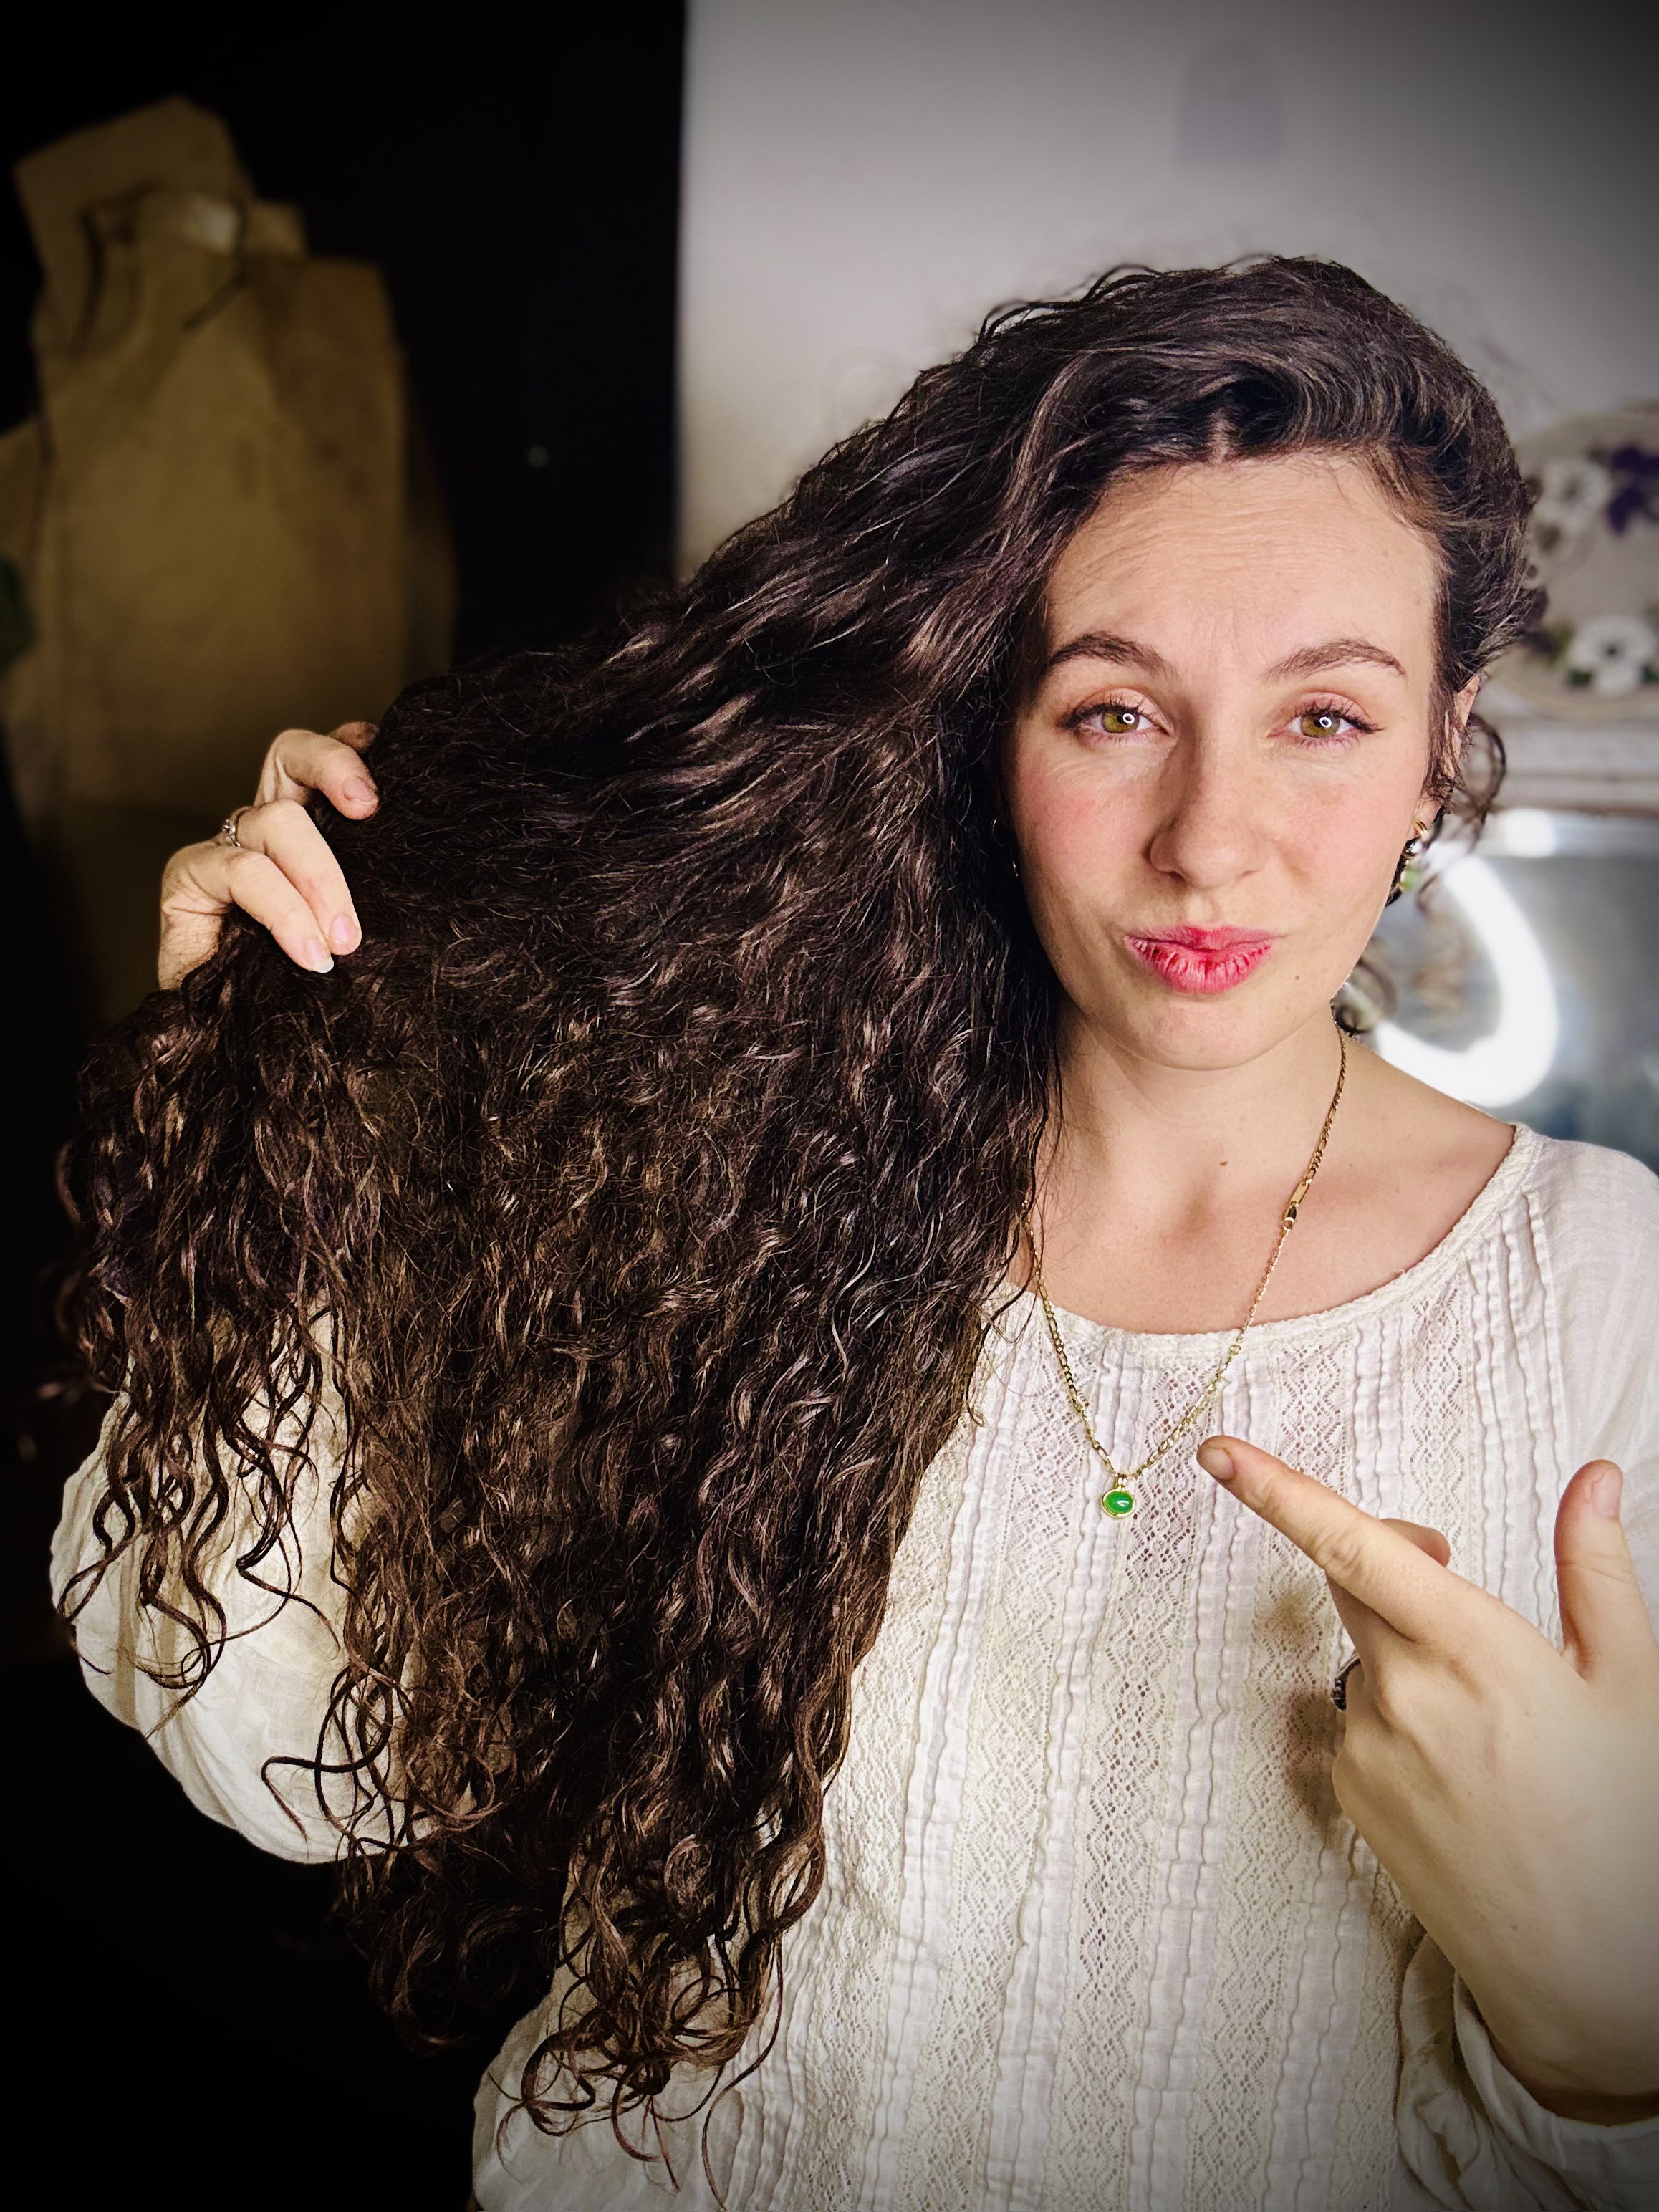 VIDEO: Mom of 4 Shares Historical Hair Care Tips to Grow Longer, Stronger,  Healthier Hair